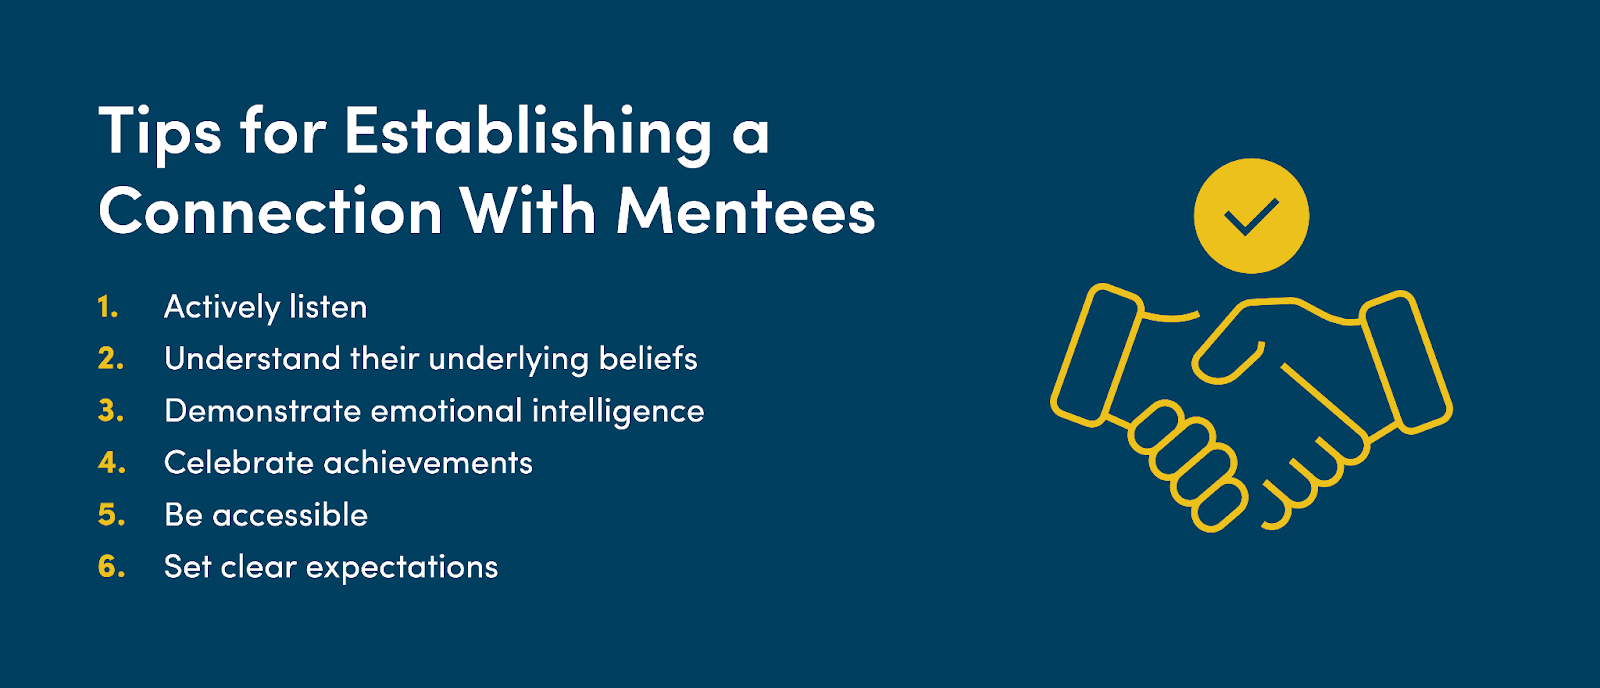 Tips for establishing a connection with mentees